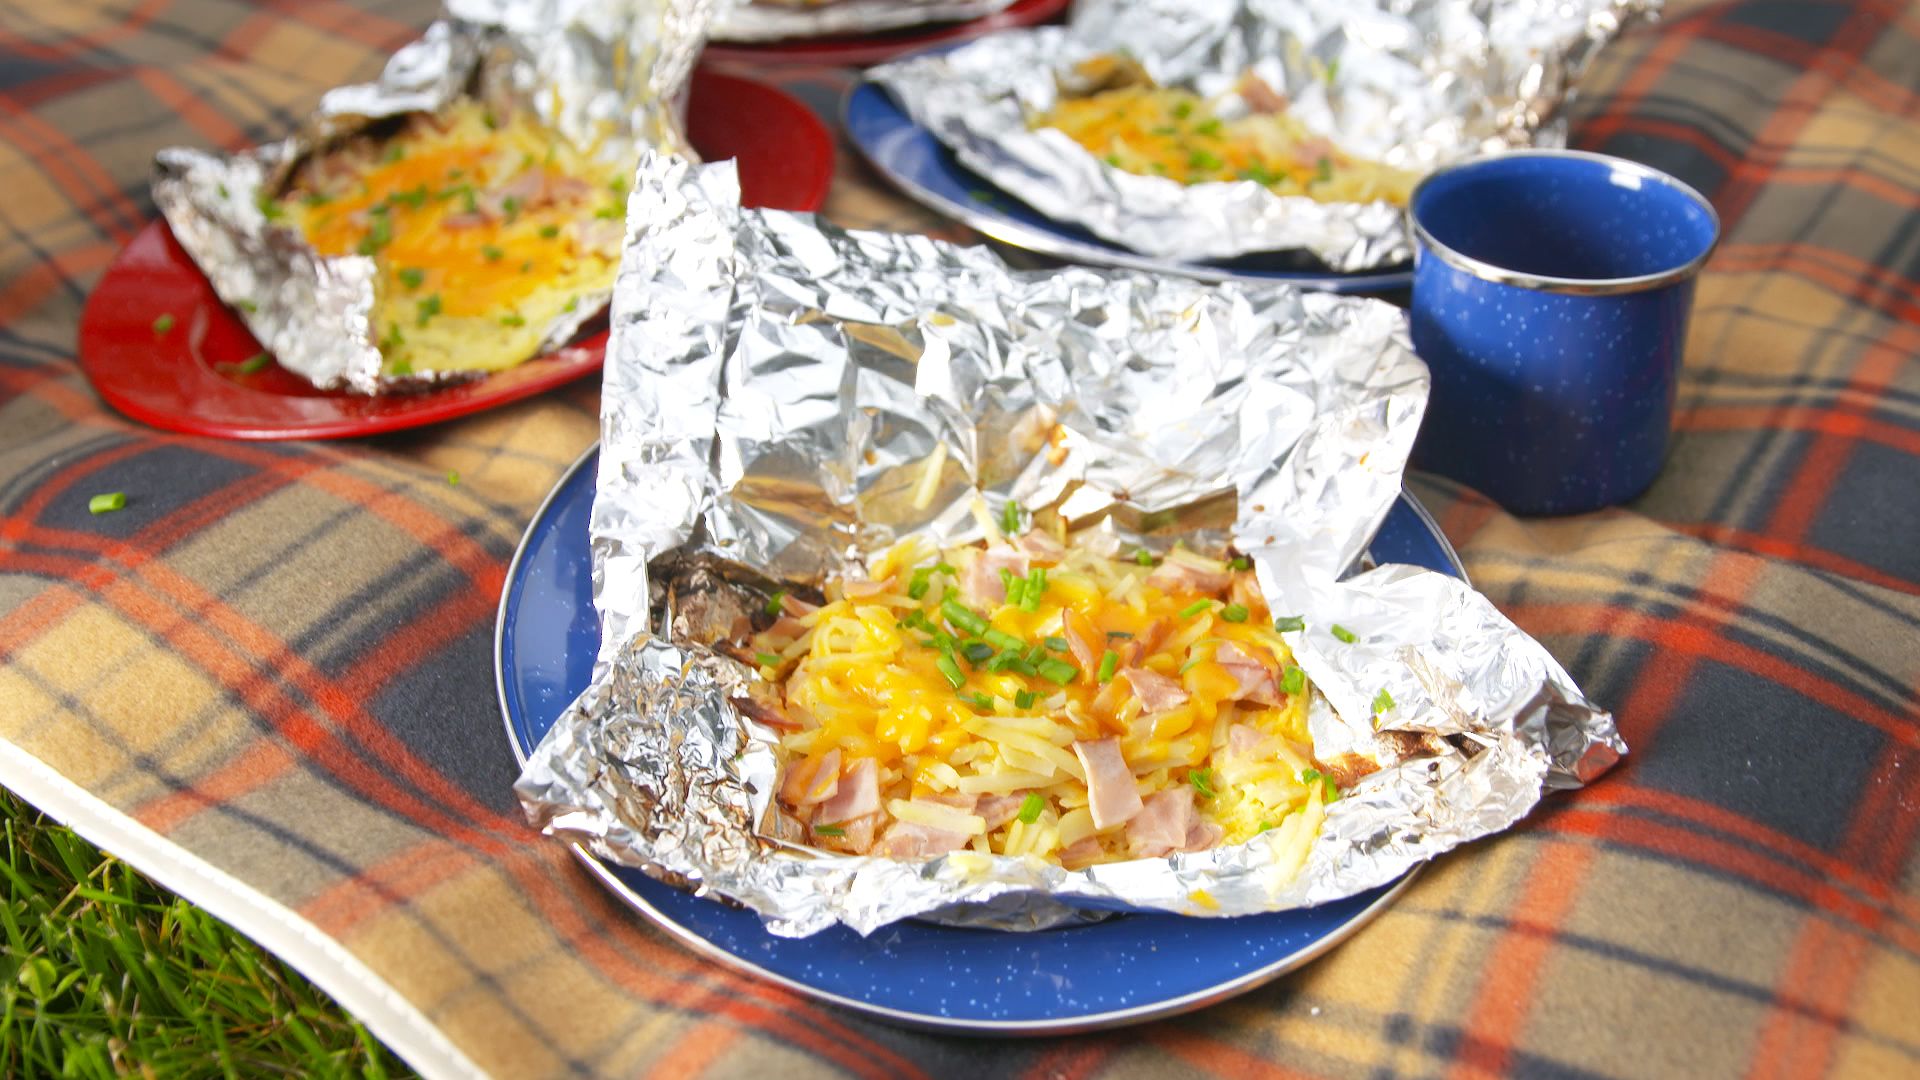 Is It Safe to Use Aluminum Foil in Cooking?